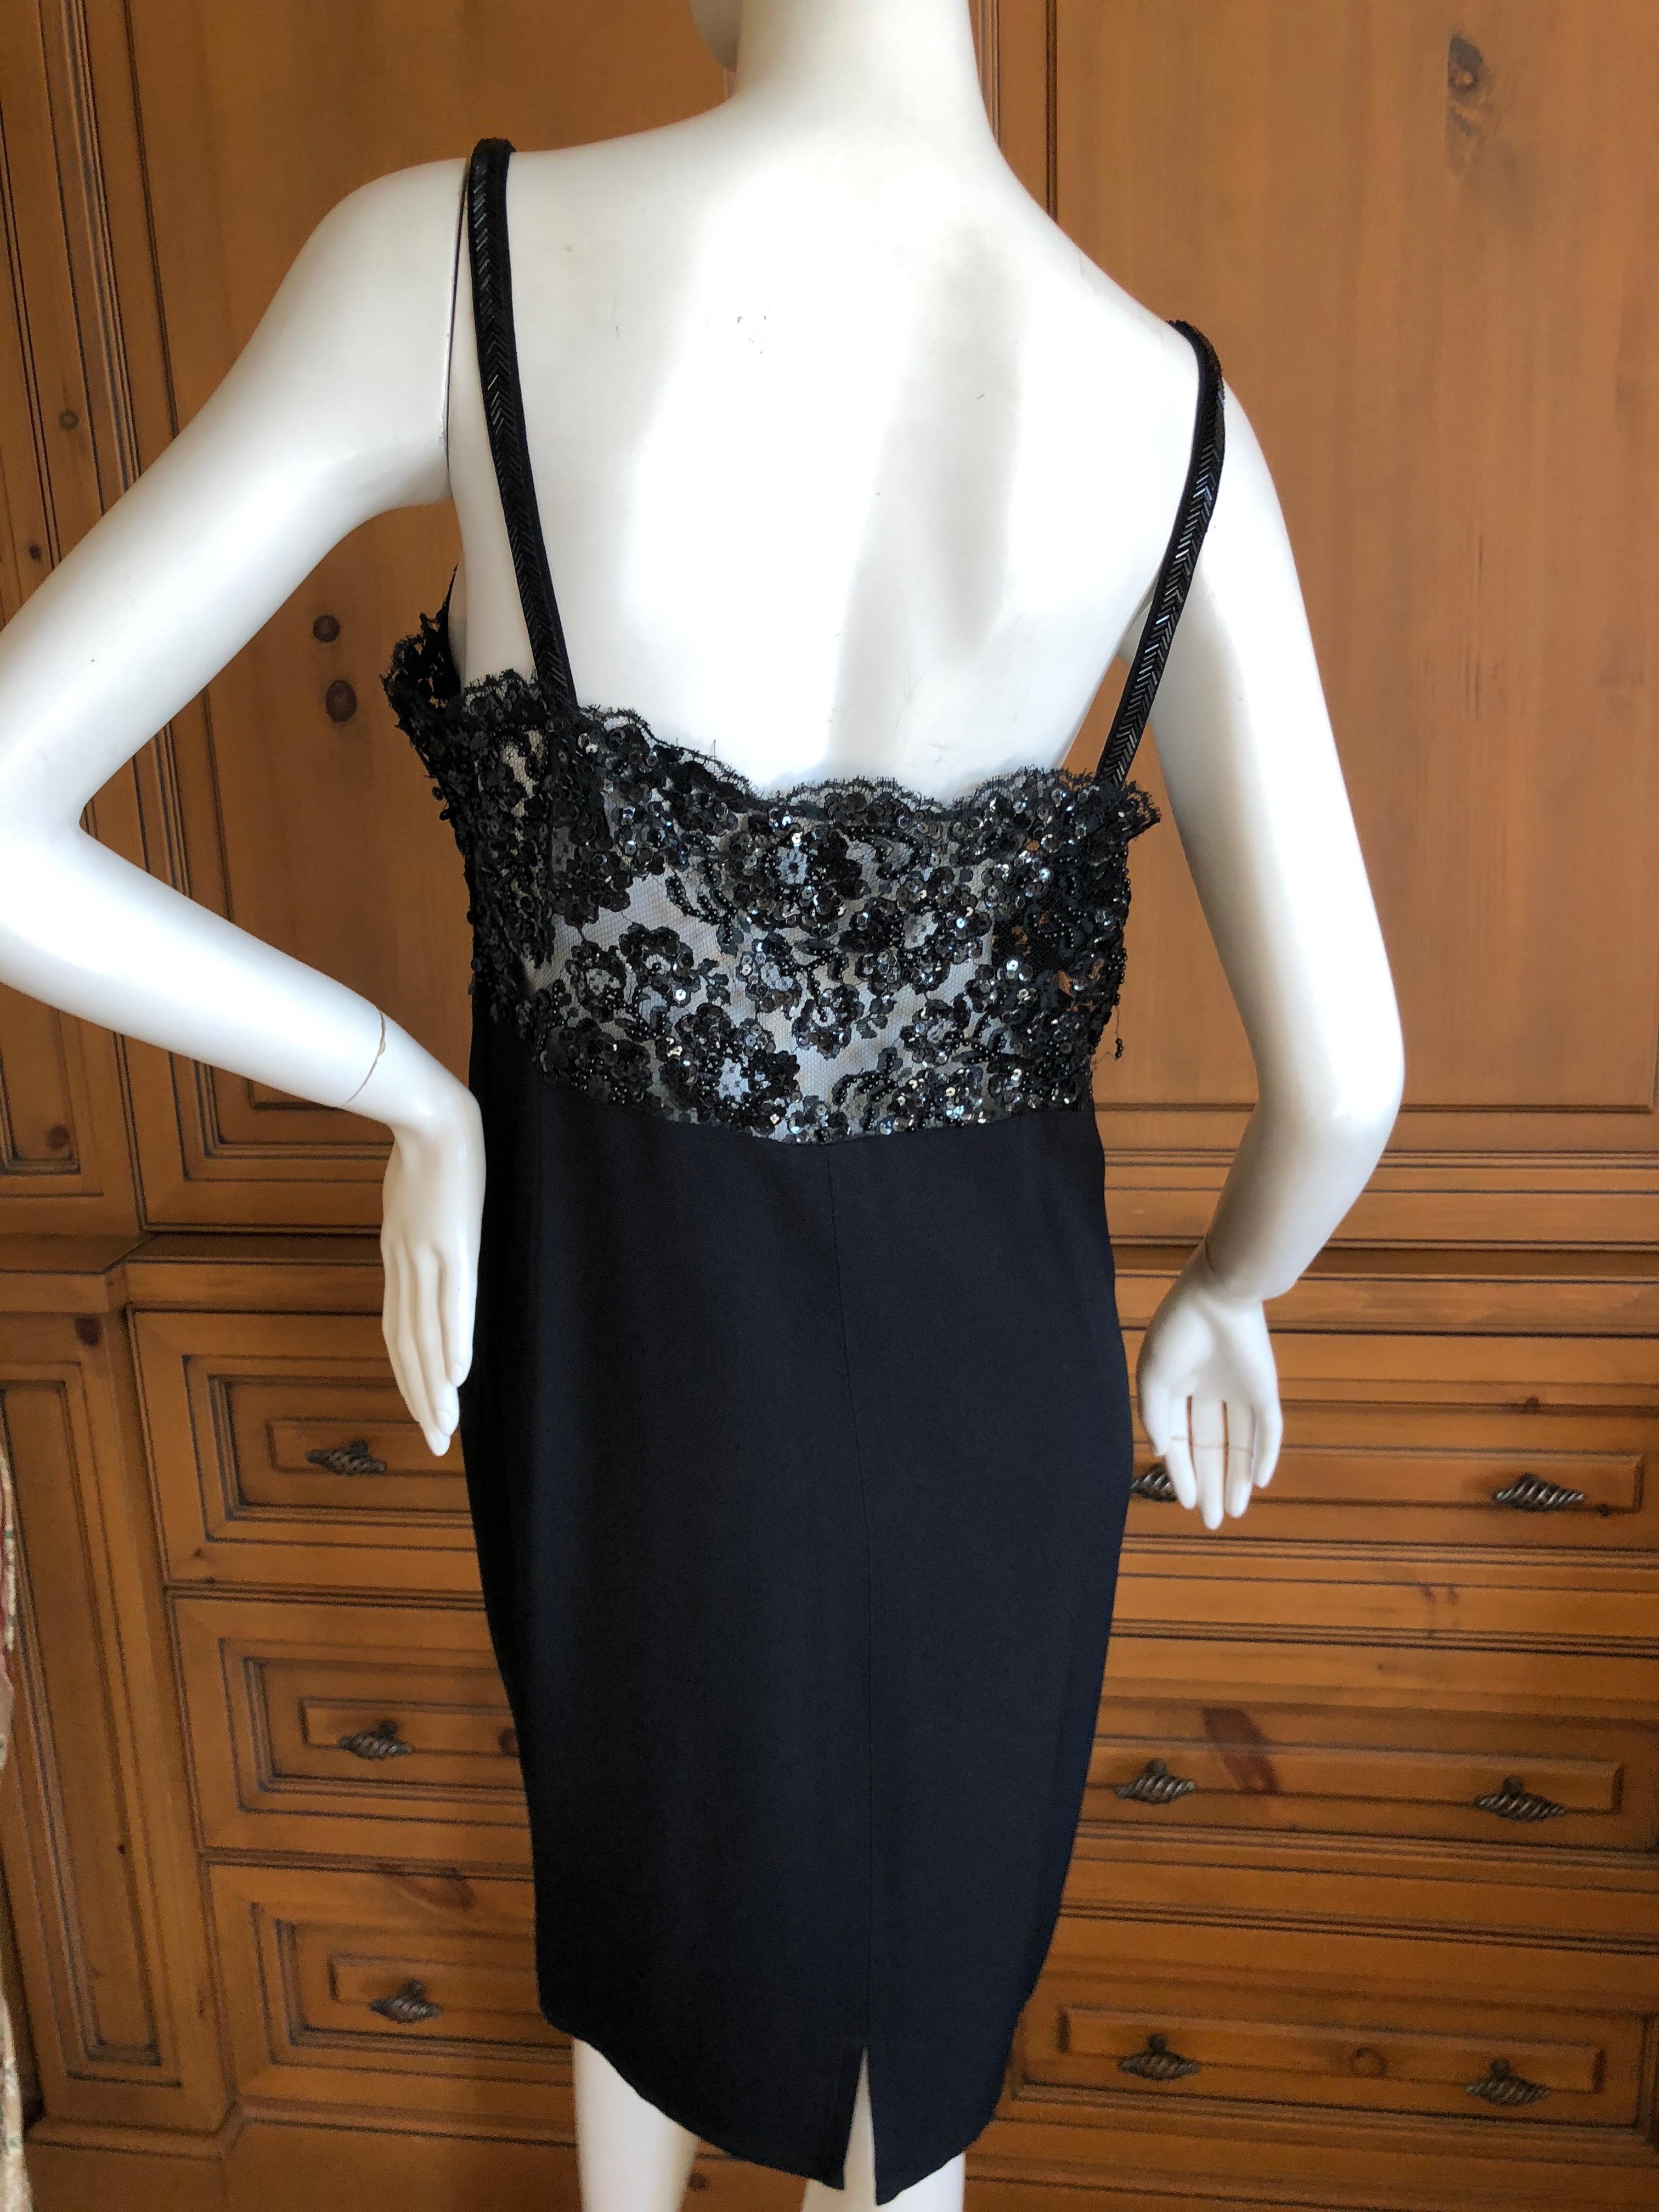 Sonia Rykiel LBD with Sheer Sequin Accented Lace Bodice For Sale 3